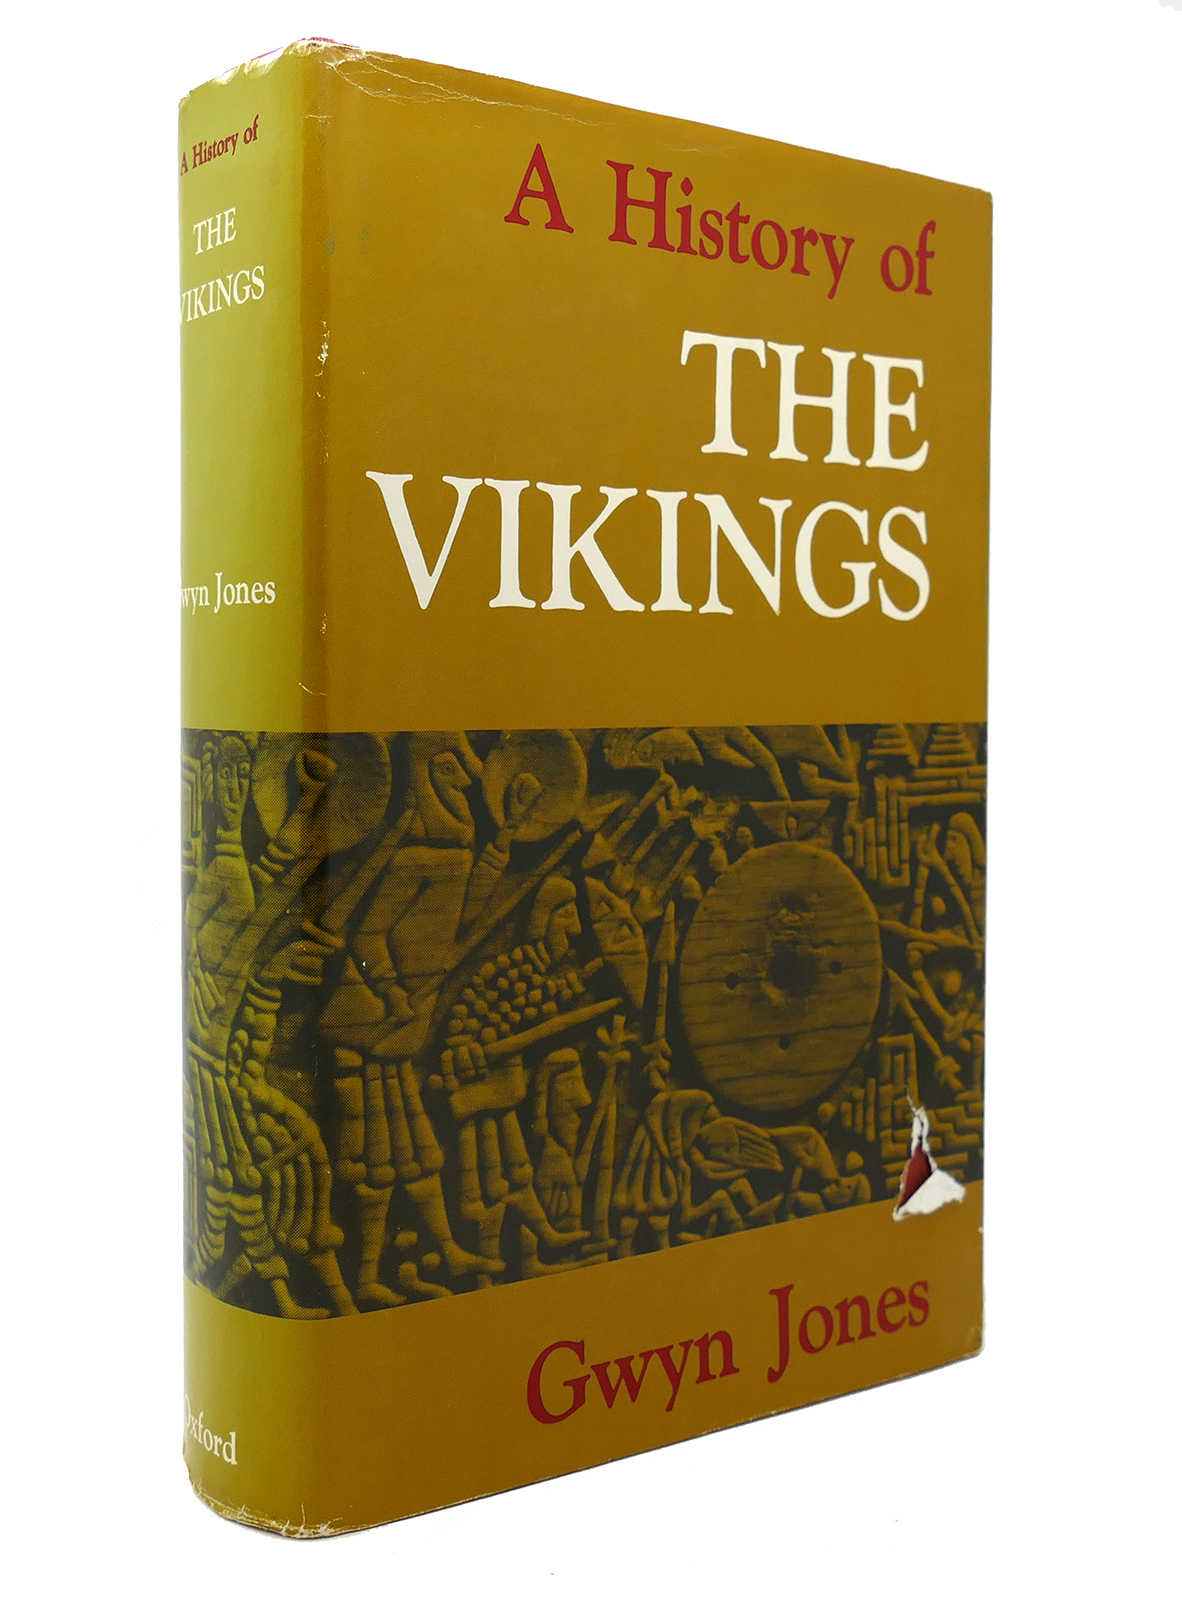 A HISTORY OF THE VIKINGS by Gwyn Jones: Hardcover (1968) First Edition ...